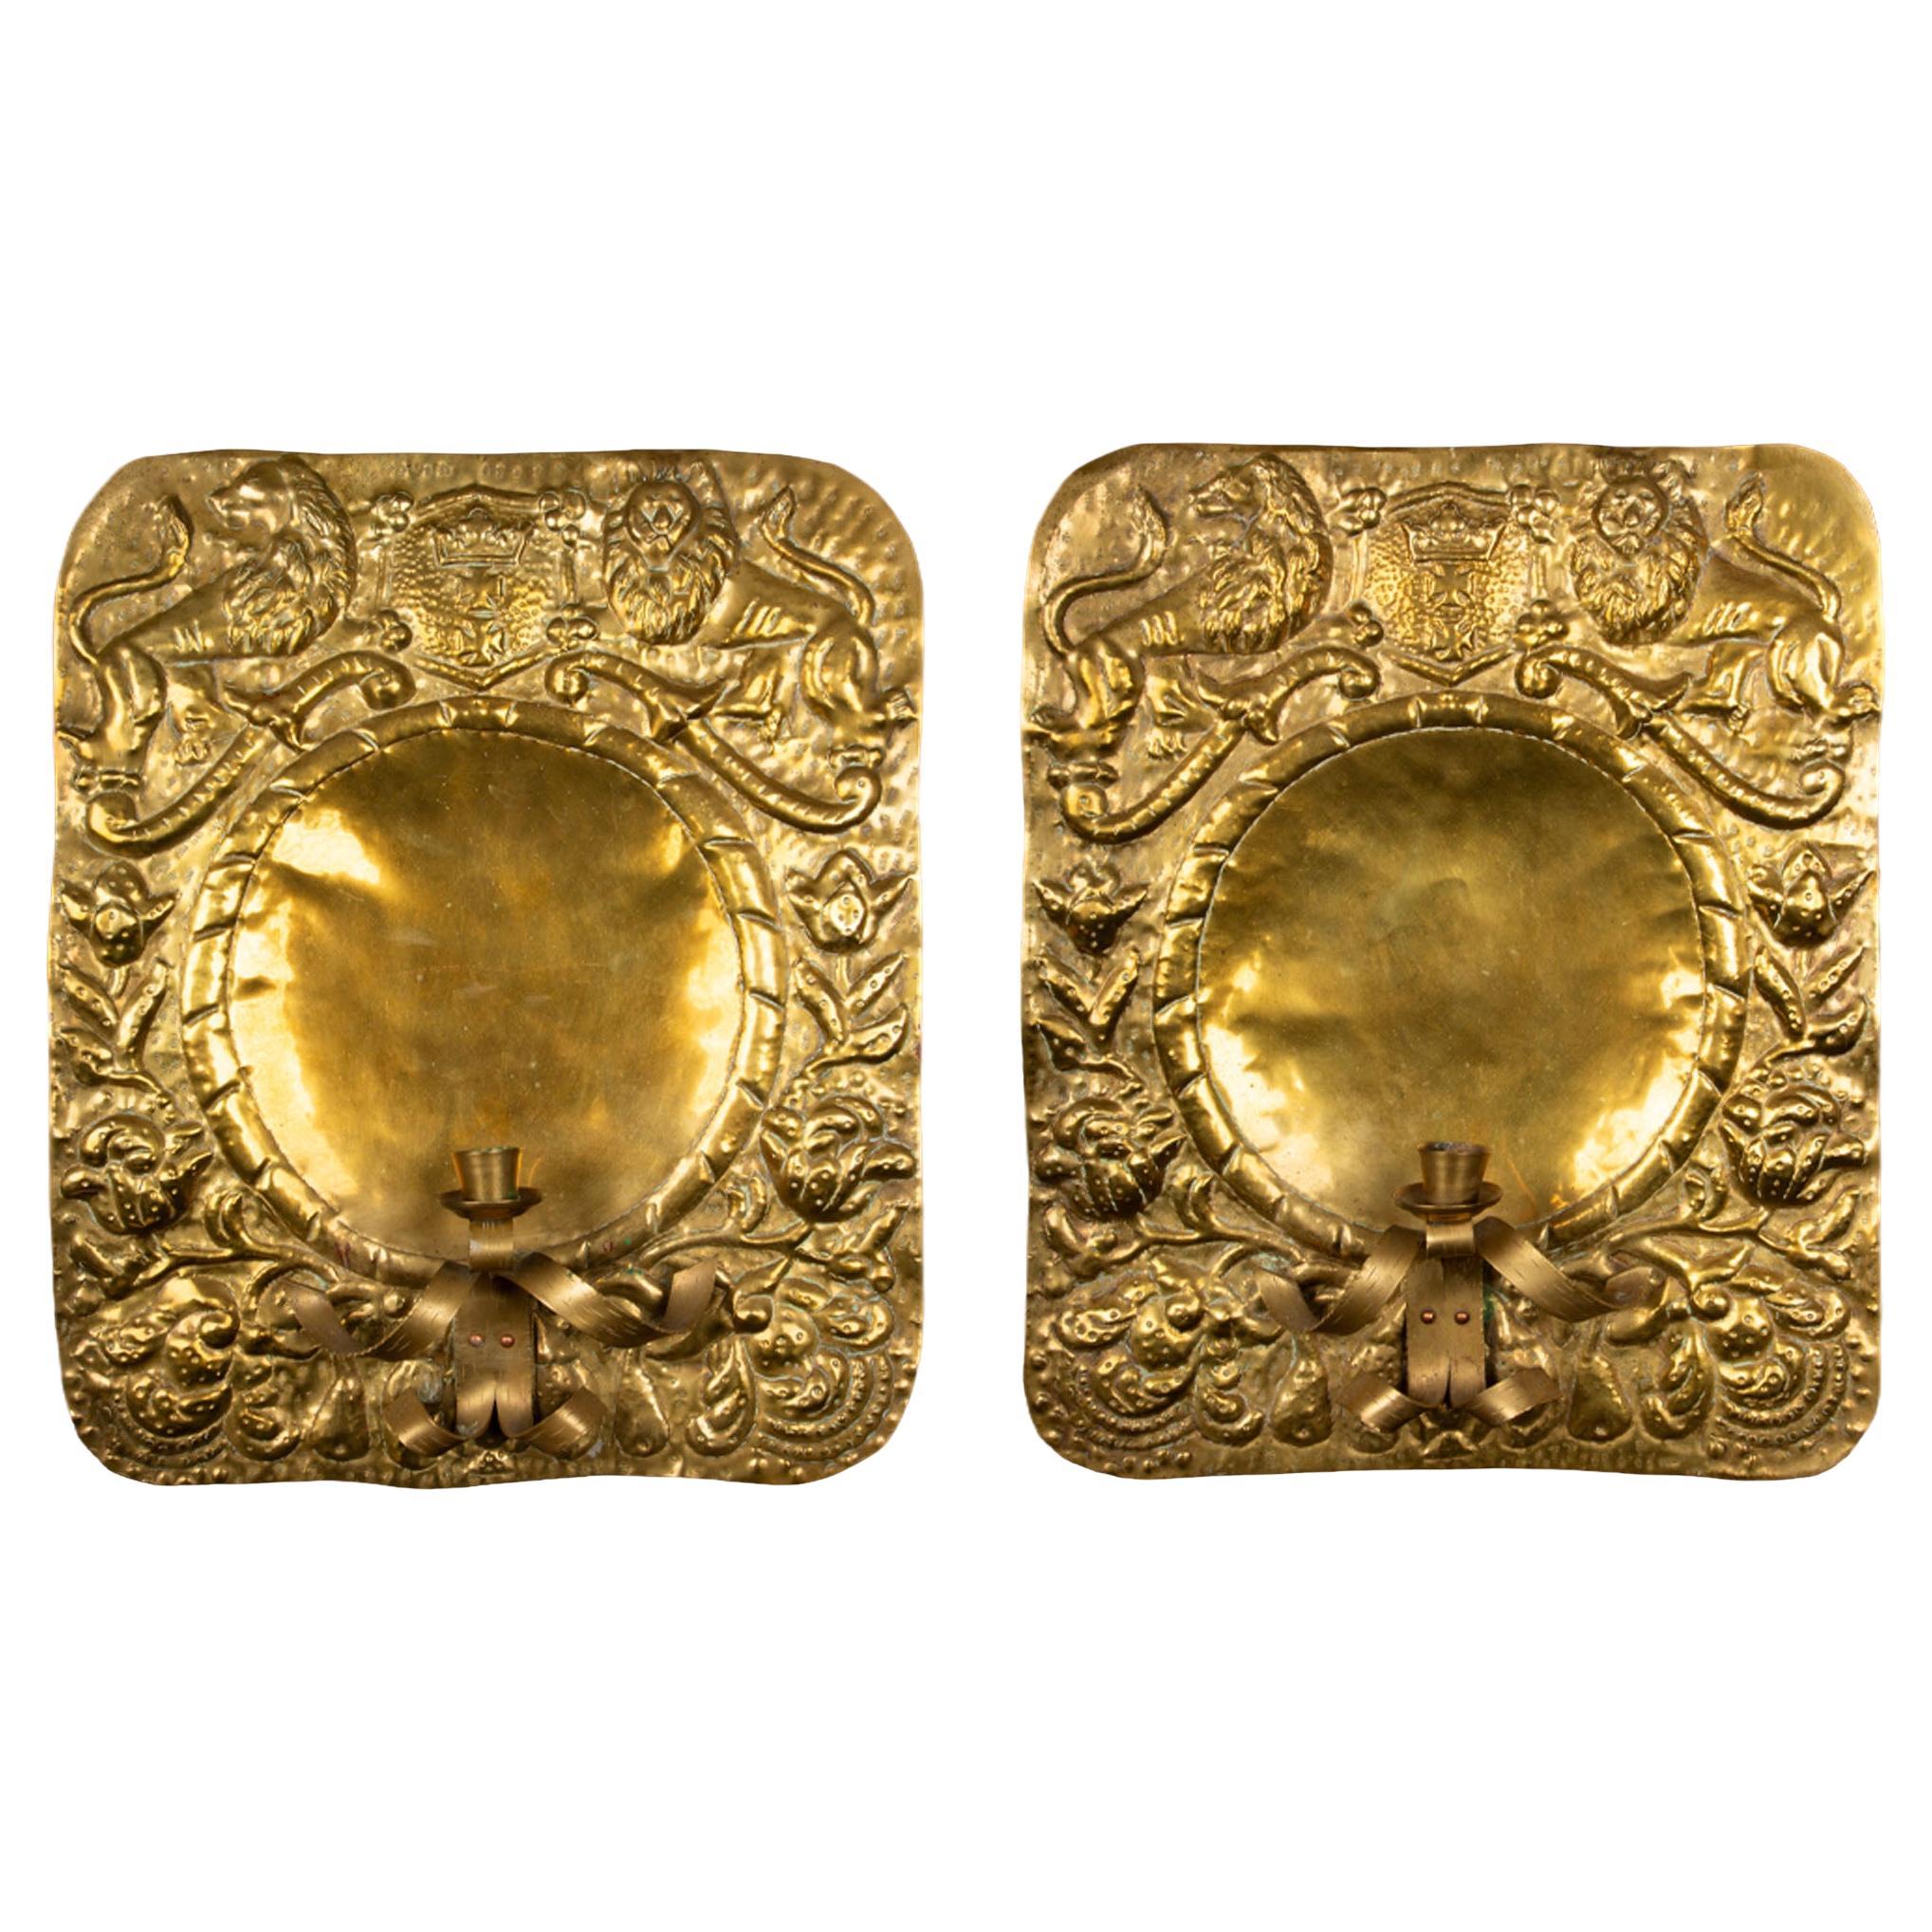 Pair of 19th Century Repousse Brass Candle Wall Sconces w/ Heraldic Coat of Arms For Sale